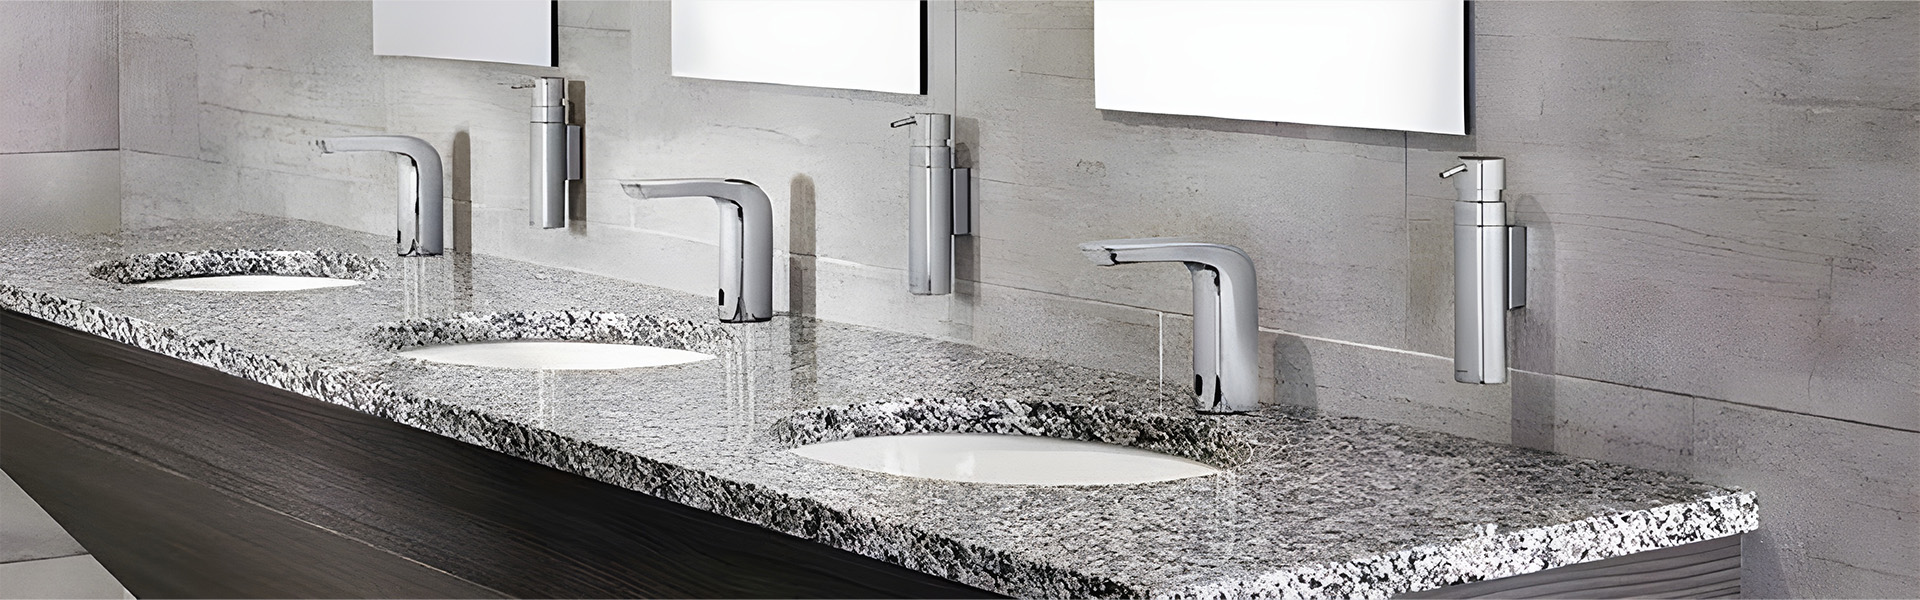 Fontana Touchless Faucets in Architectural Specs